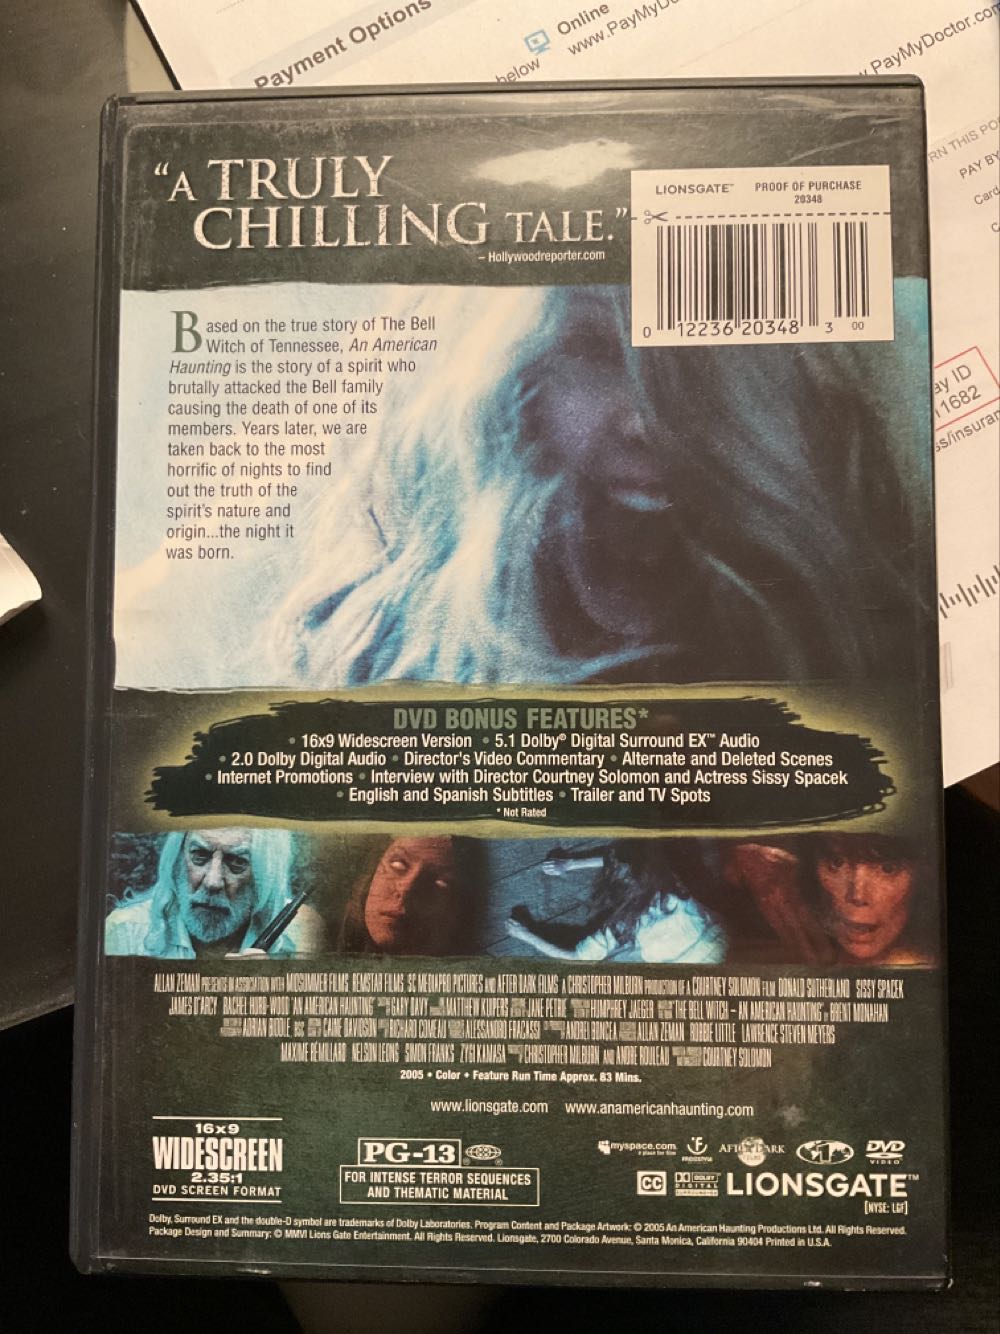 American Haunting P2, An DVD movie collectible [Barcode 012236203483] - Main Image 2